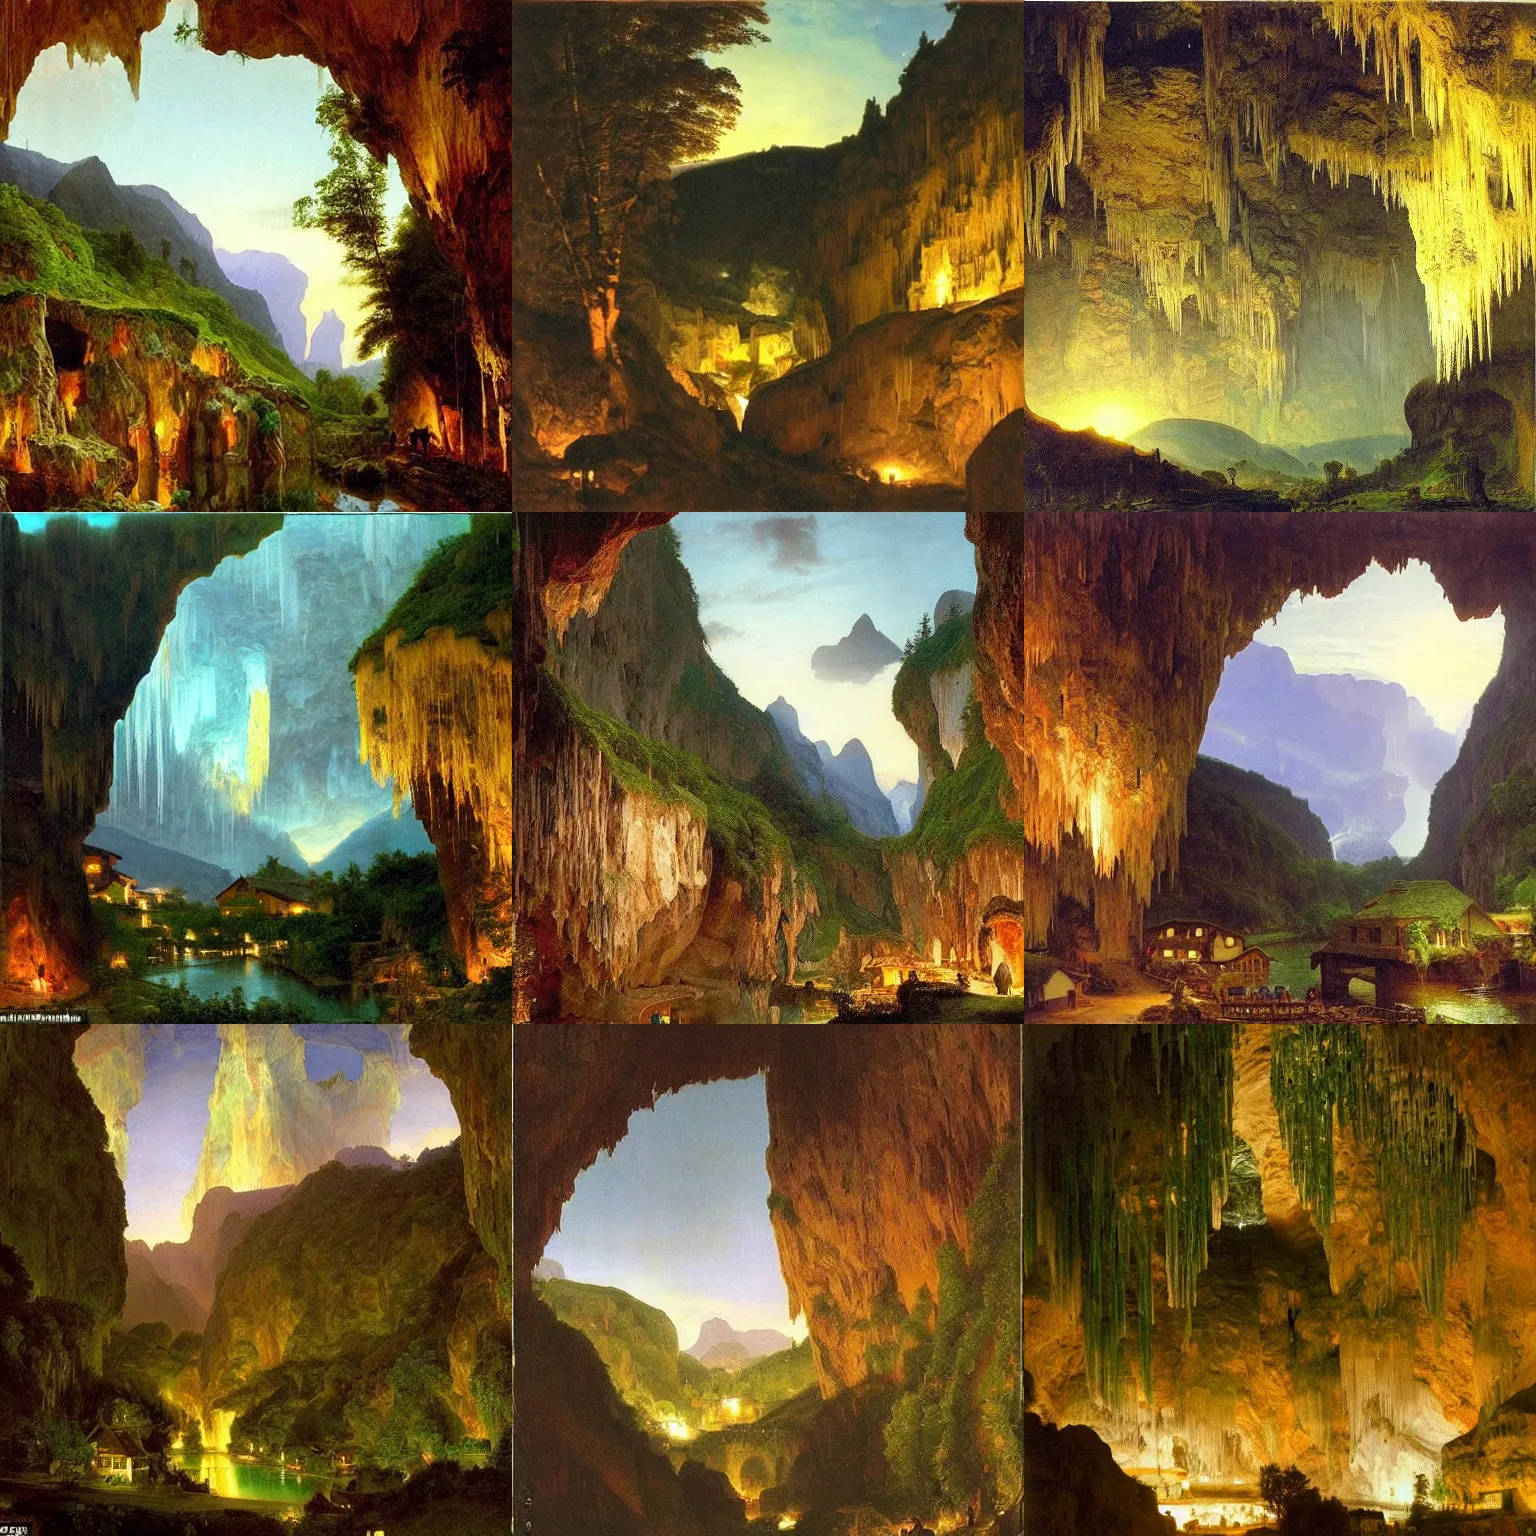 Prompt: a quaint swiss village at night with cottages, a river with sawmills, glowing lights and green park land, all inside an enormous cavern, cavern ceiling visible with large stalactites, by frederic edwin church